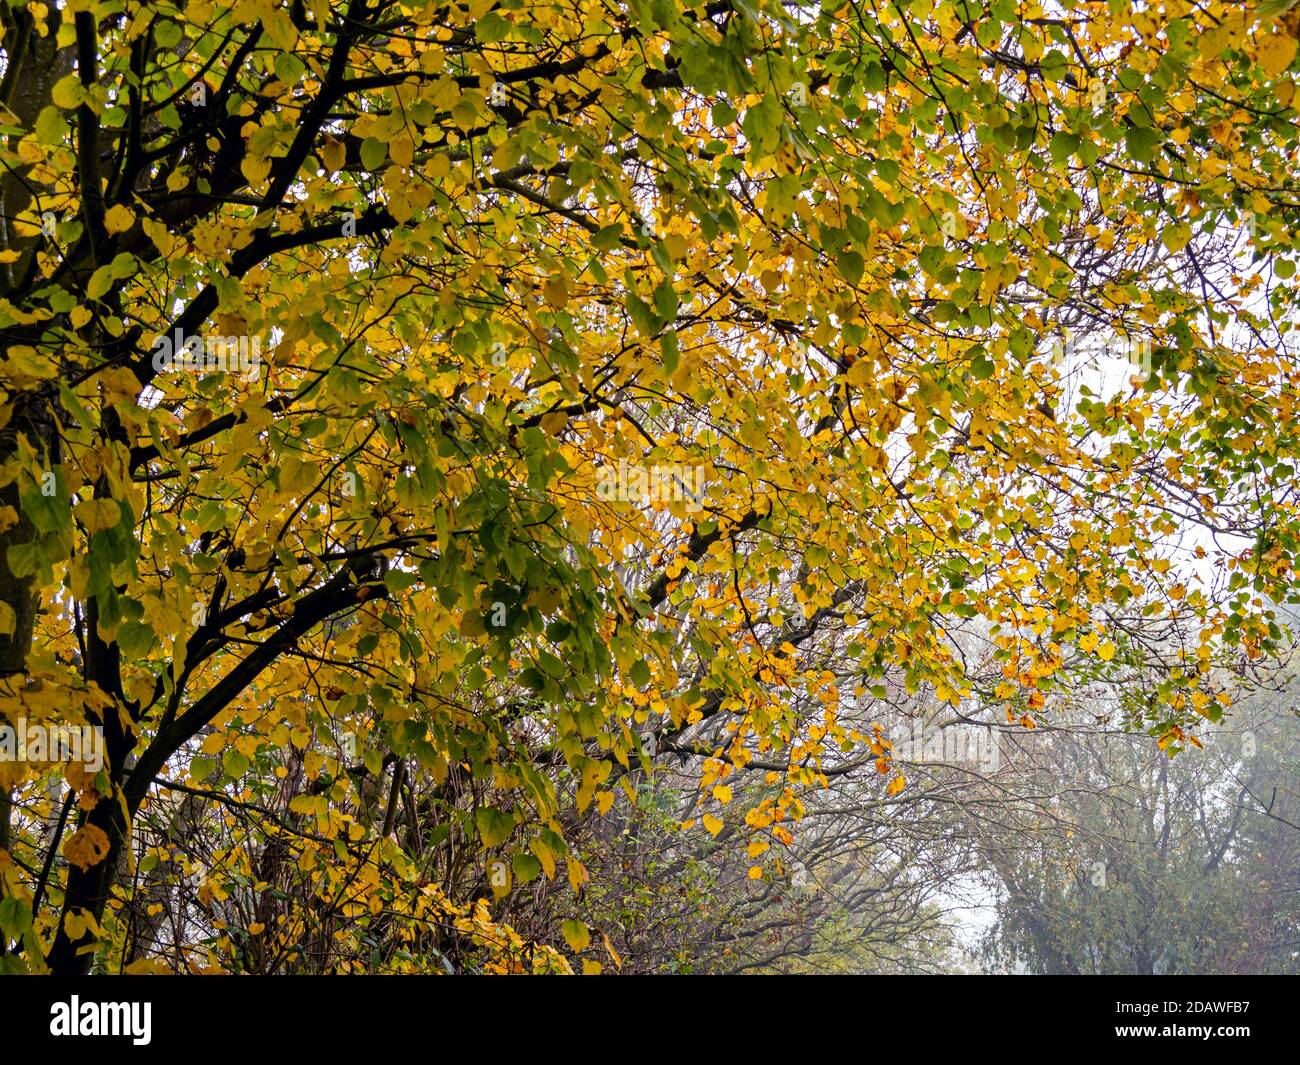 Colourful autumn leaves on the branches of a row of young beech trees Stock Photo